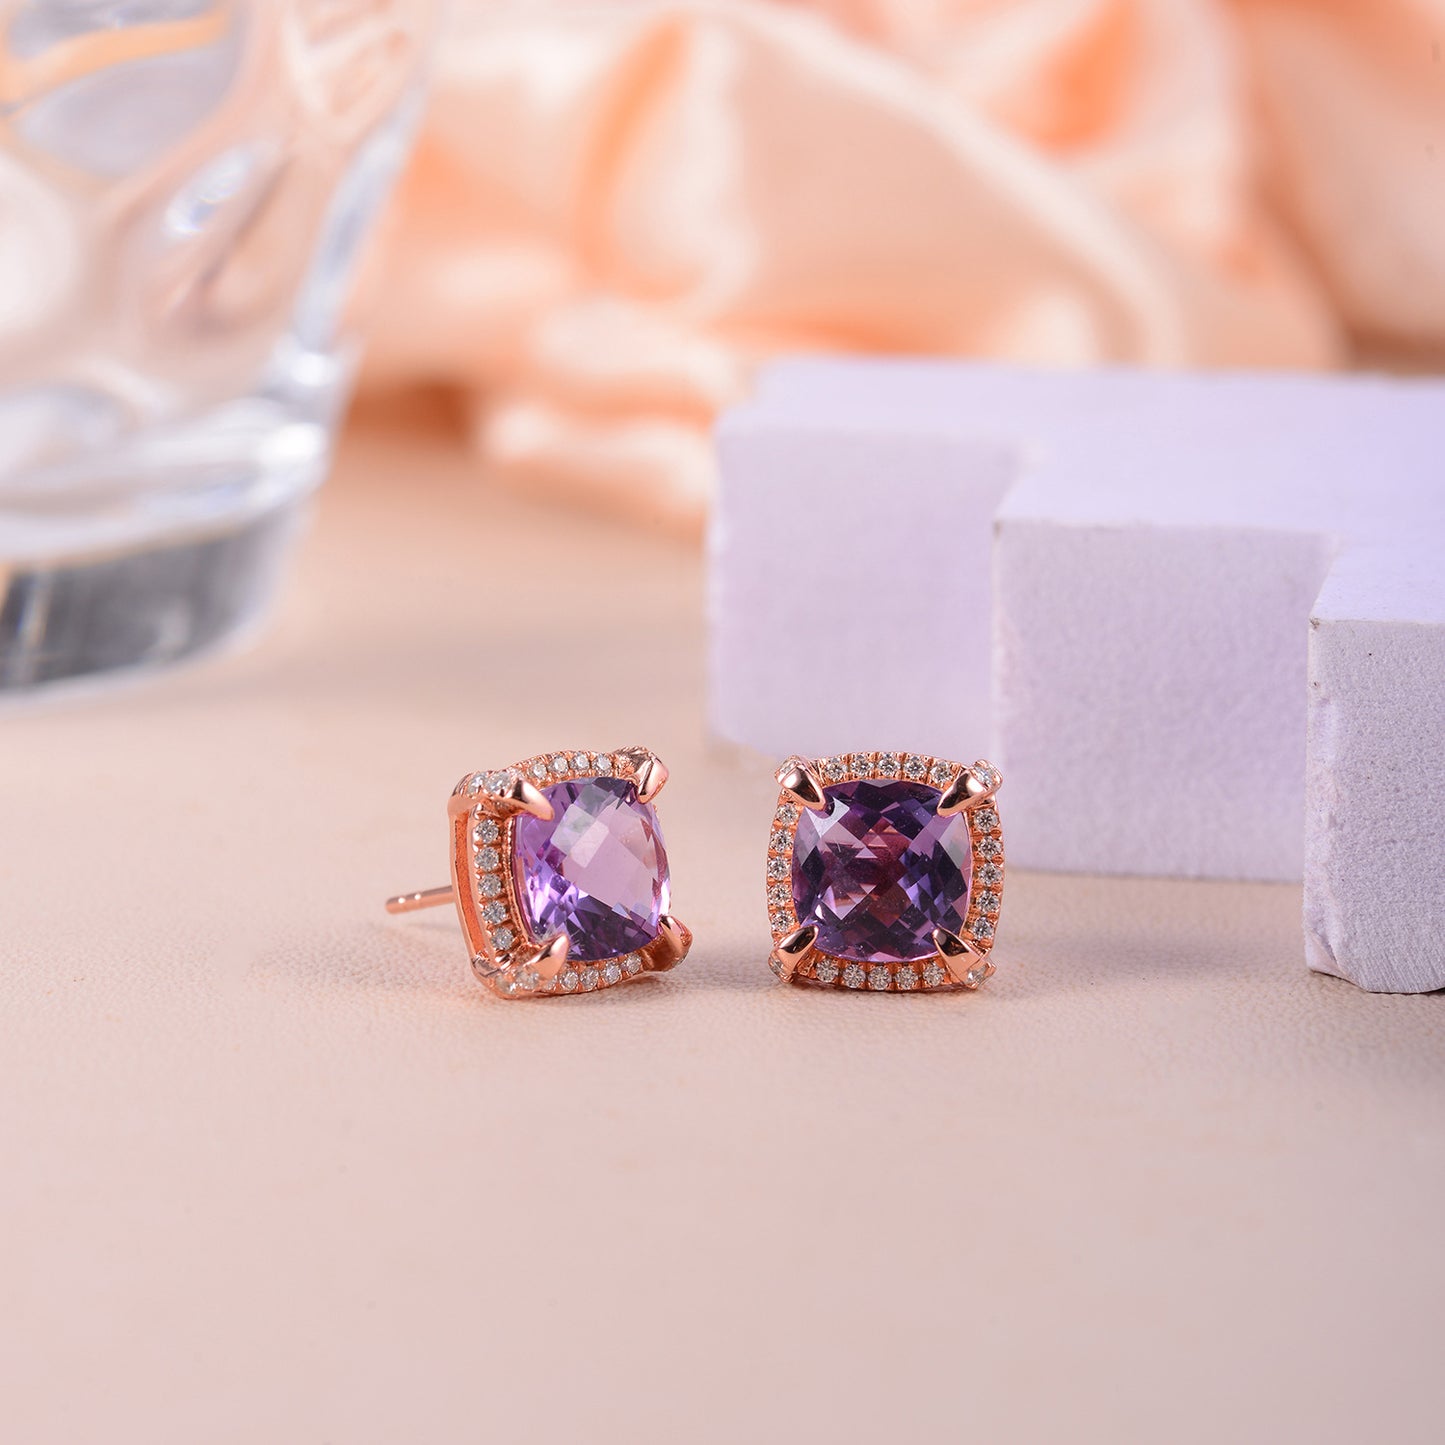 Soleste Halo Square Natural Amethyst Silver Stud Earrings